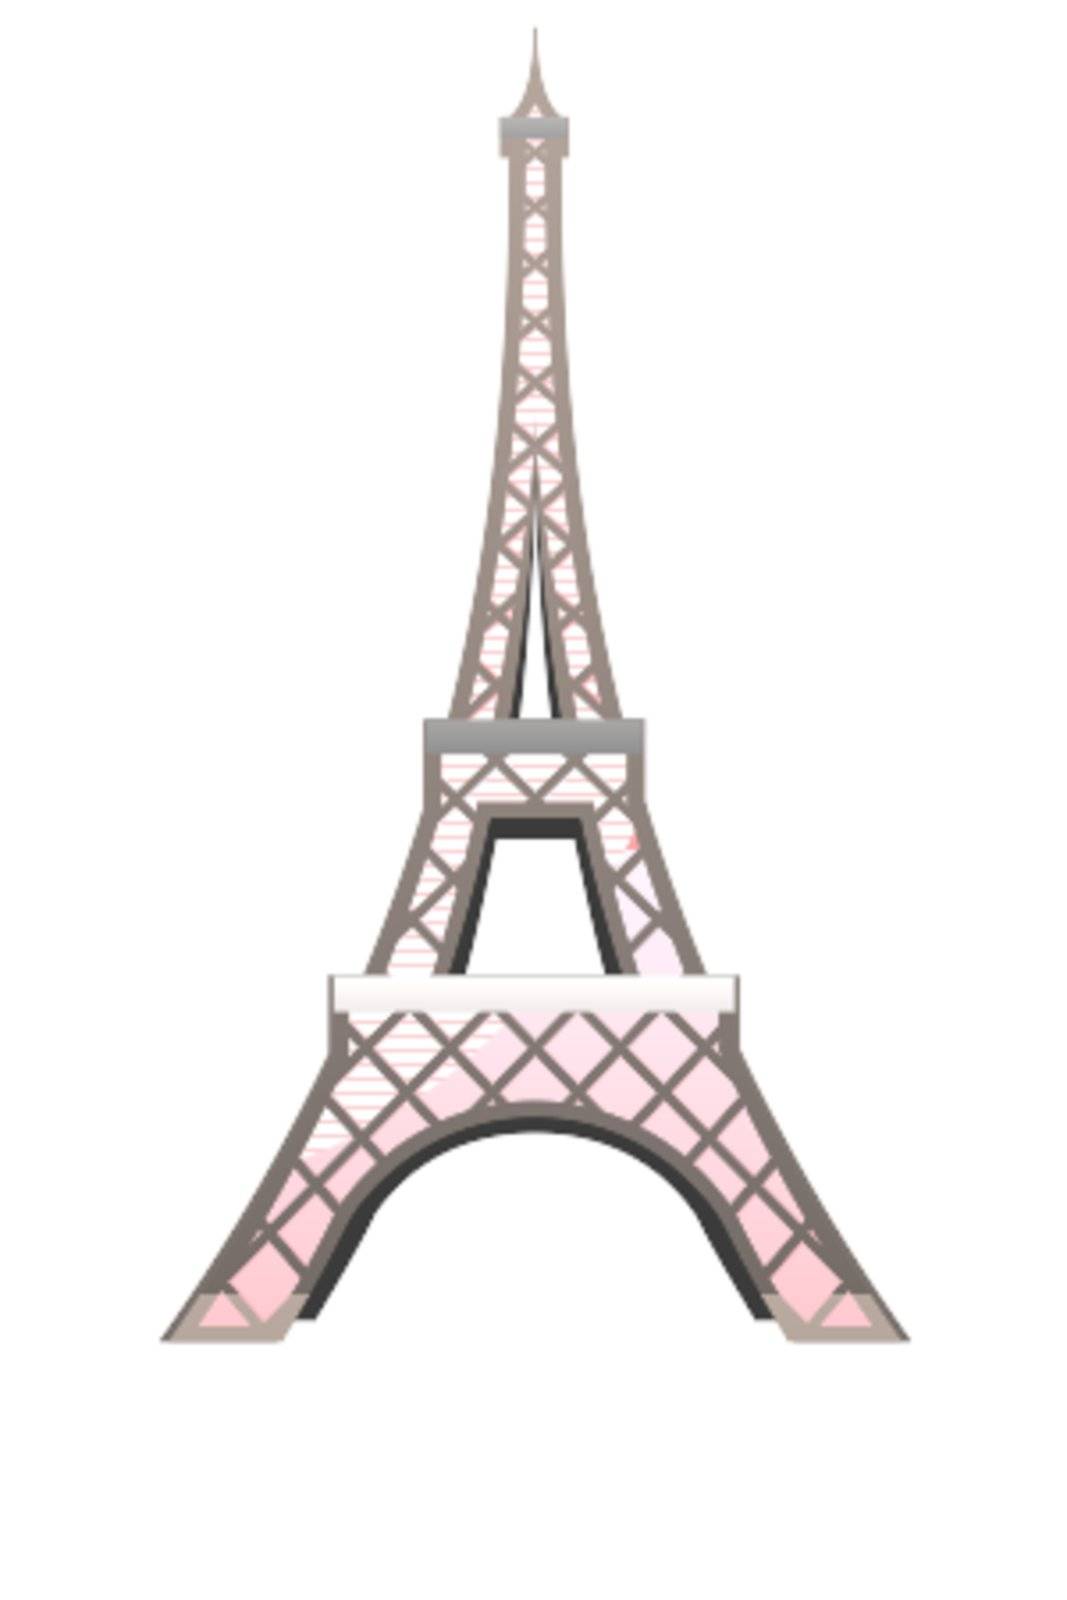 Eiffel tower designed in a glossy style